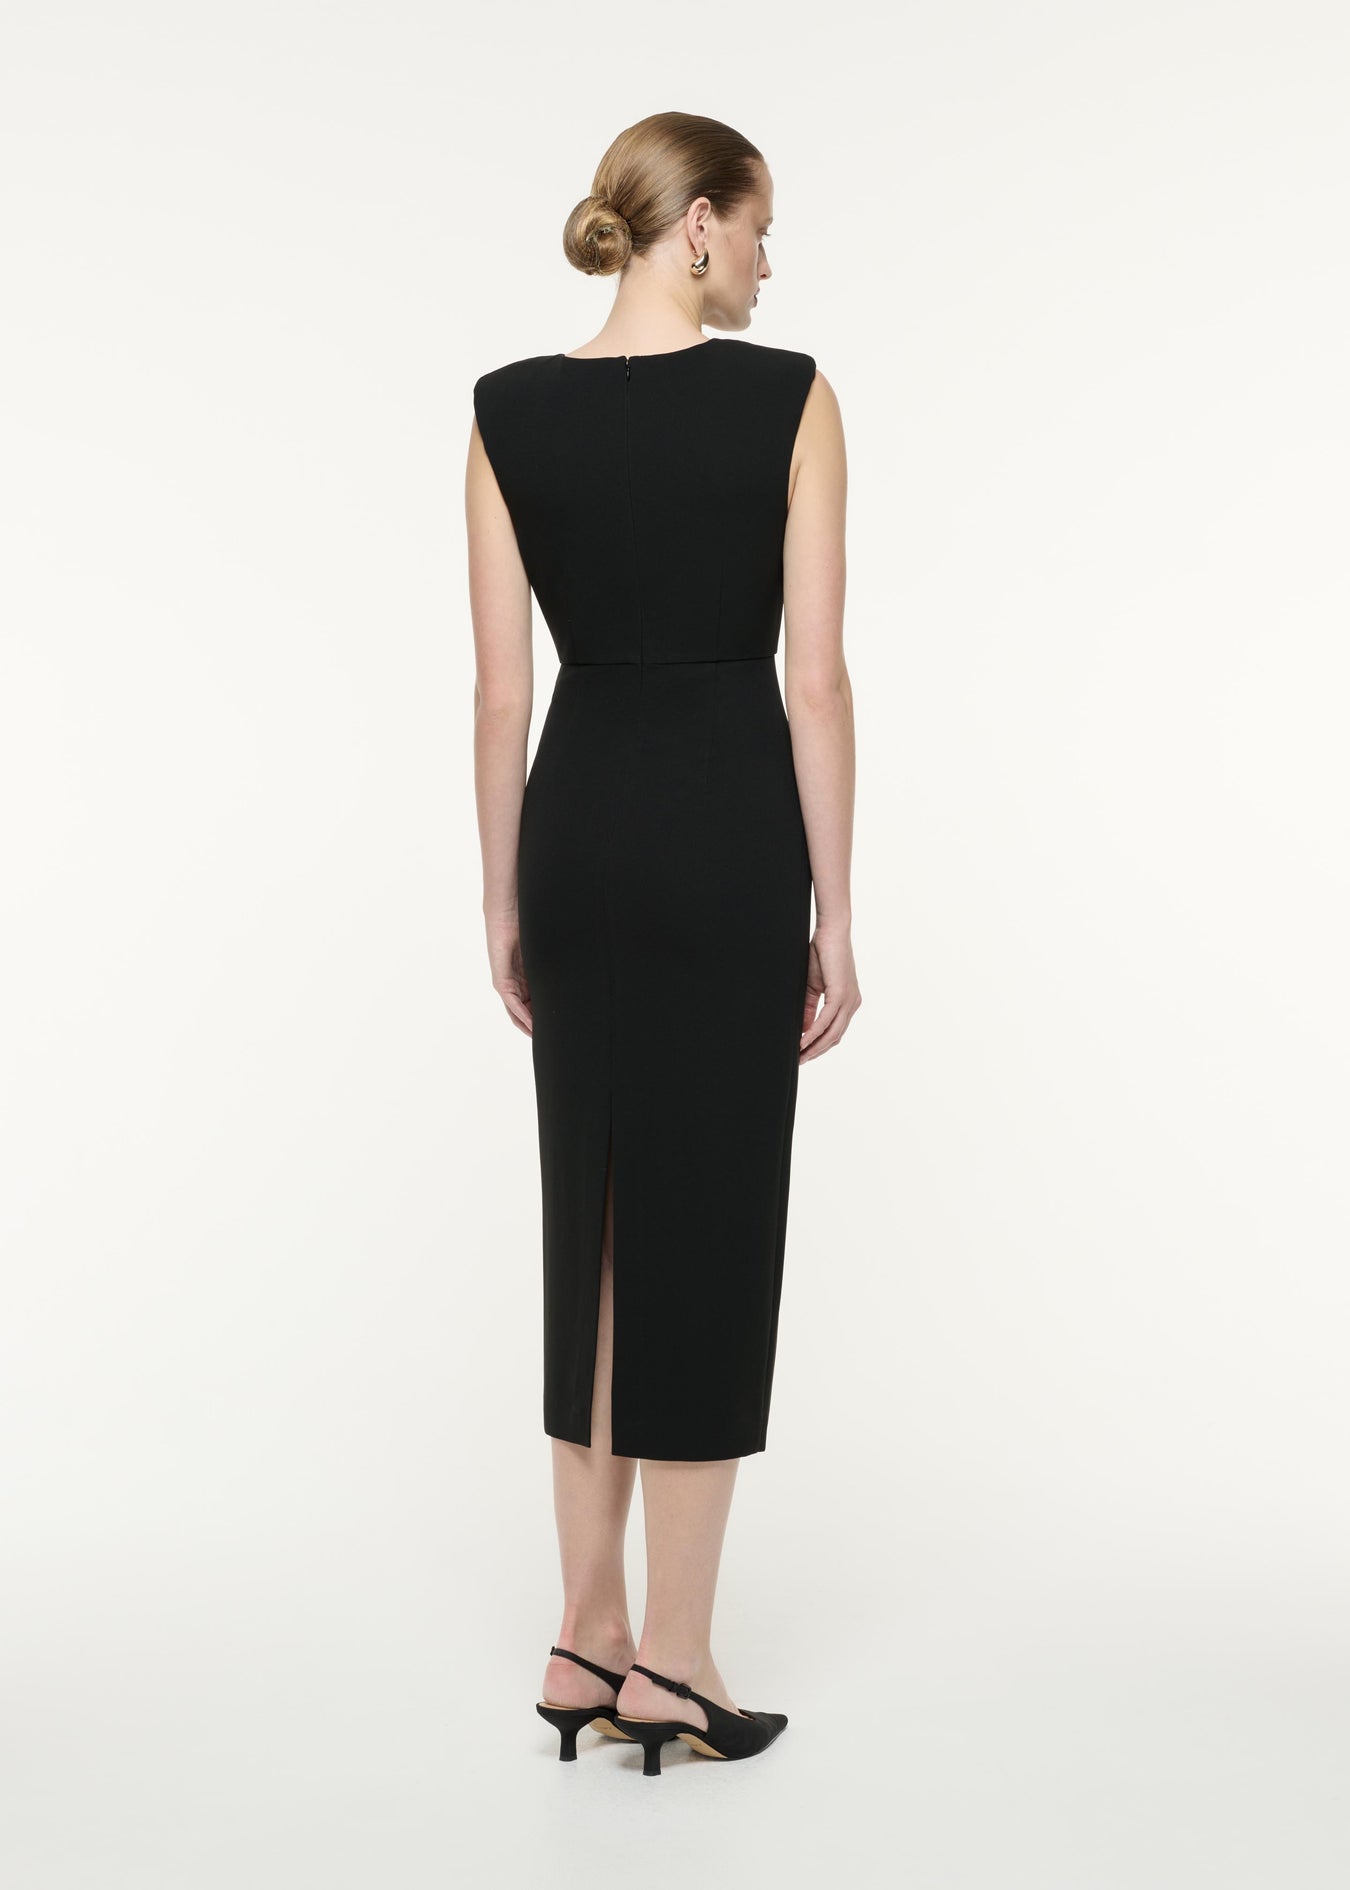 A back view image of a model wearing the Heavy Cady Ruffle Midi Dress in Monochrome